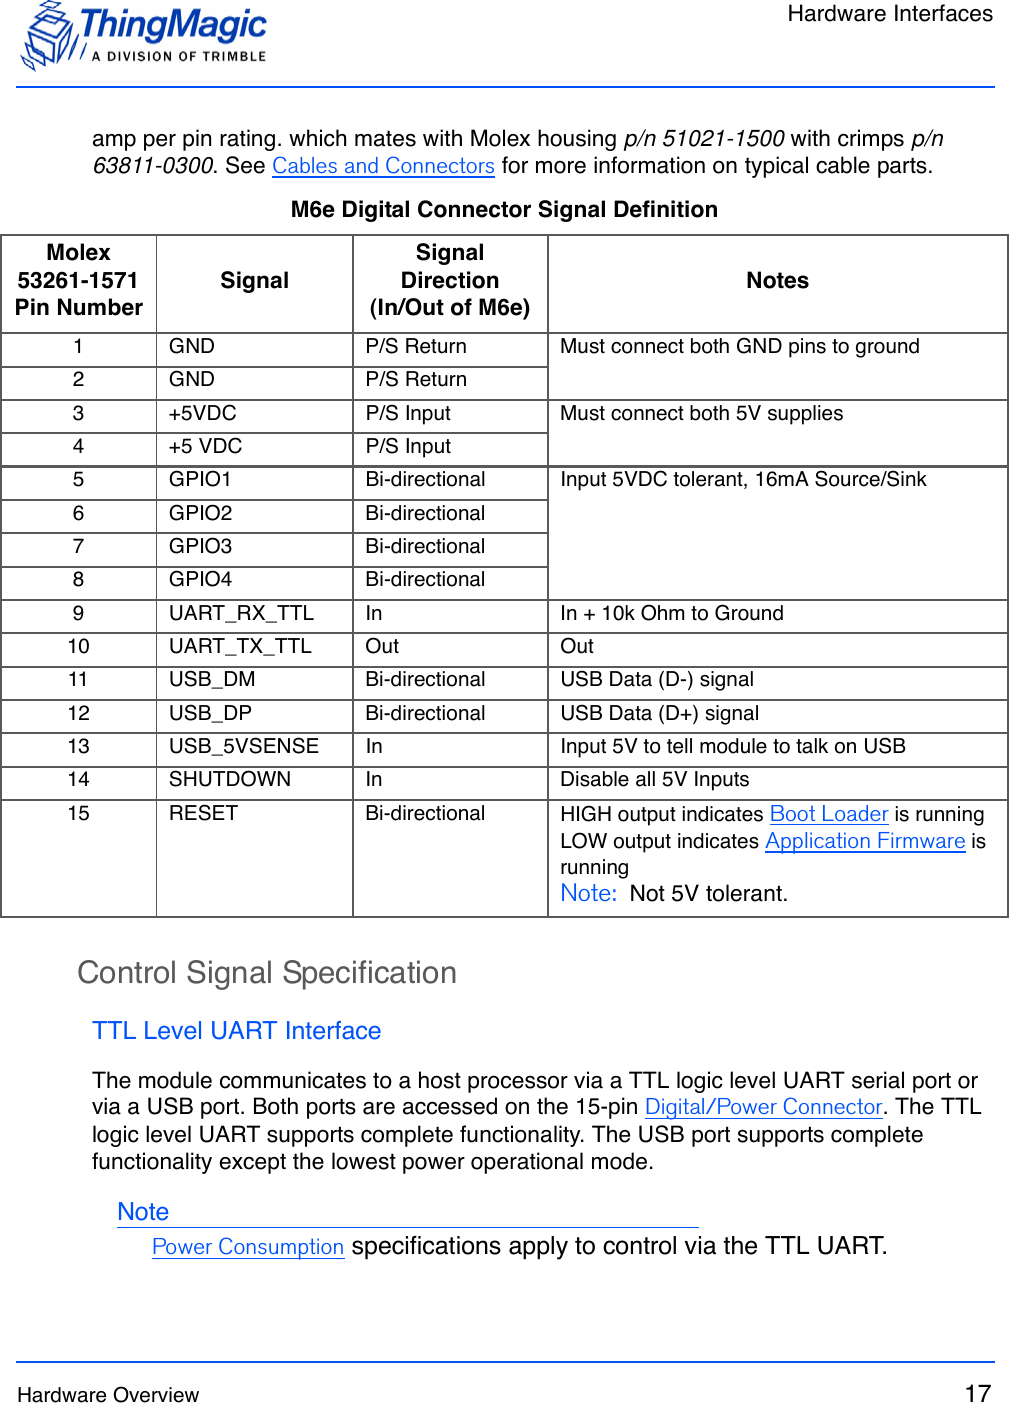 Hardware InterfacesHardware Overview 17amp per pin rating. which mates with Molex housing p/n 51021-1500 with crimps p/n 63811-0300. See Cables and Connectors for more information on typical cable parts.Control Signal SpecificationTTL Level UART InterfaceThe module communicates to a host processor via a TTL logic level UART serial port or via a USB port. Both ports are accessed on the 15-pin Digital/Power Connector. The TTL logic level UART supports complete functionality. The USB port supports complete functionality except the lowest power operational mode. NotePower Consumption specifications apply to control via the TTL UART.M6e Digital Connector Signal DefinitionMolex 53261-1571 Pin NumberSignalSignal Direction (In/Out of M6e)Notes1 GND P/S Return Must connect both GND pins to ground2 GND P/S Return3 +5VDC P/S Input Must connect both 5V supplies4 +5 VDC P/S Input5 GPIO1 Bi-directional Input 5VDC tolerant, 16mA Source/Sink6 GPIO2 Bi-directional7 GPIO3 Bi-directional8 GPIO4 Bi-directional9 UART_RX_TTL In In + 10k Ohm to Ground10 UART_TX_TTL Out Out11 USB_DM Bi-directional USB Data (D-) signal12 USB_DP Bi-directional USB Data (D+) signal13 USB_5VSENSE In Input 5V to tell module to talk on USB14 SHUTDOWN In Disable all 5V Inputs15 RESET Bi-directional HIGH output indicates Boot Loader is runningLOW output indicates Application Firmware is runningNote:  Not 5V tolerant.